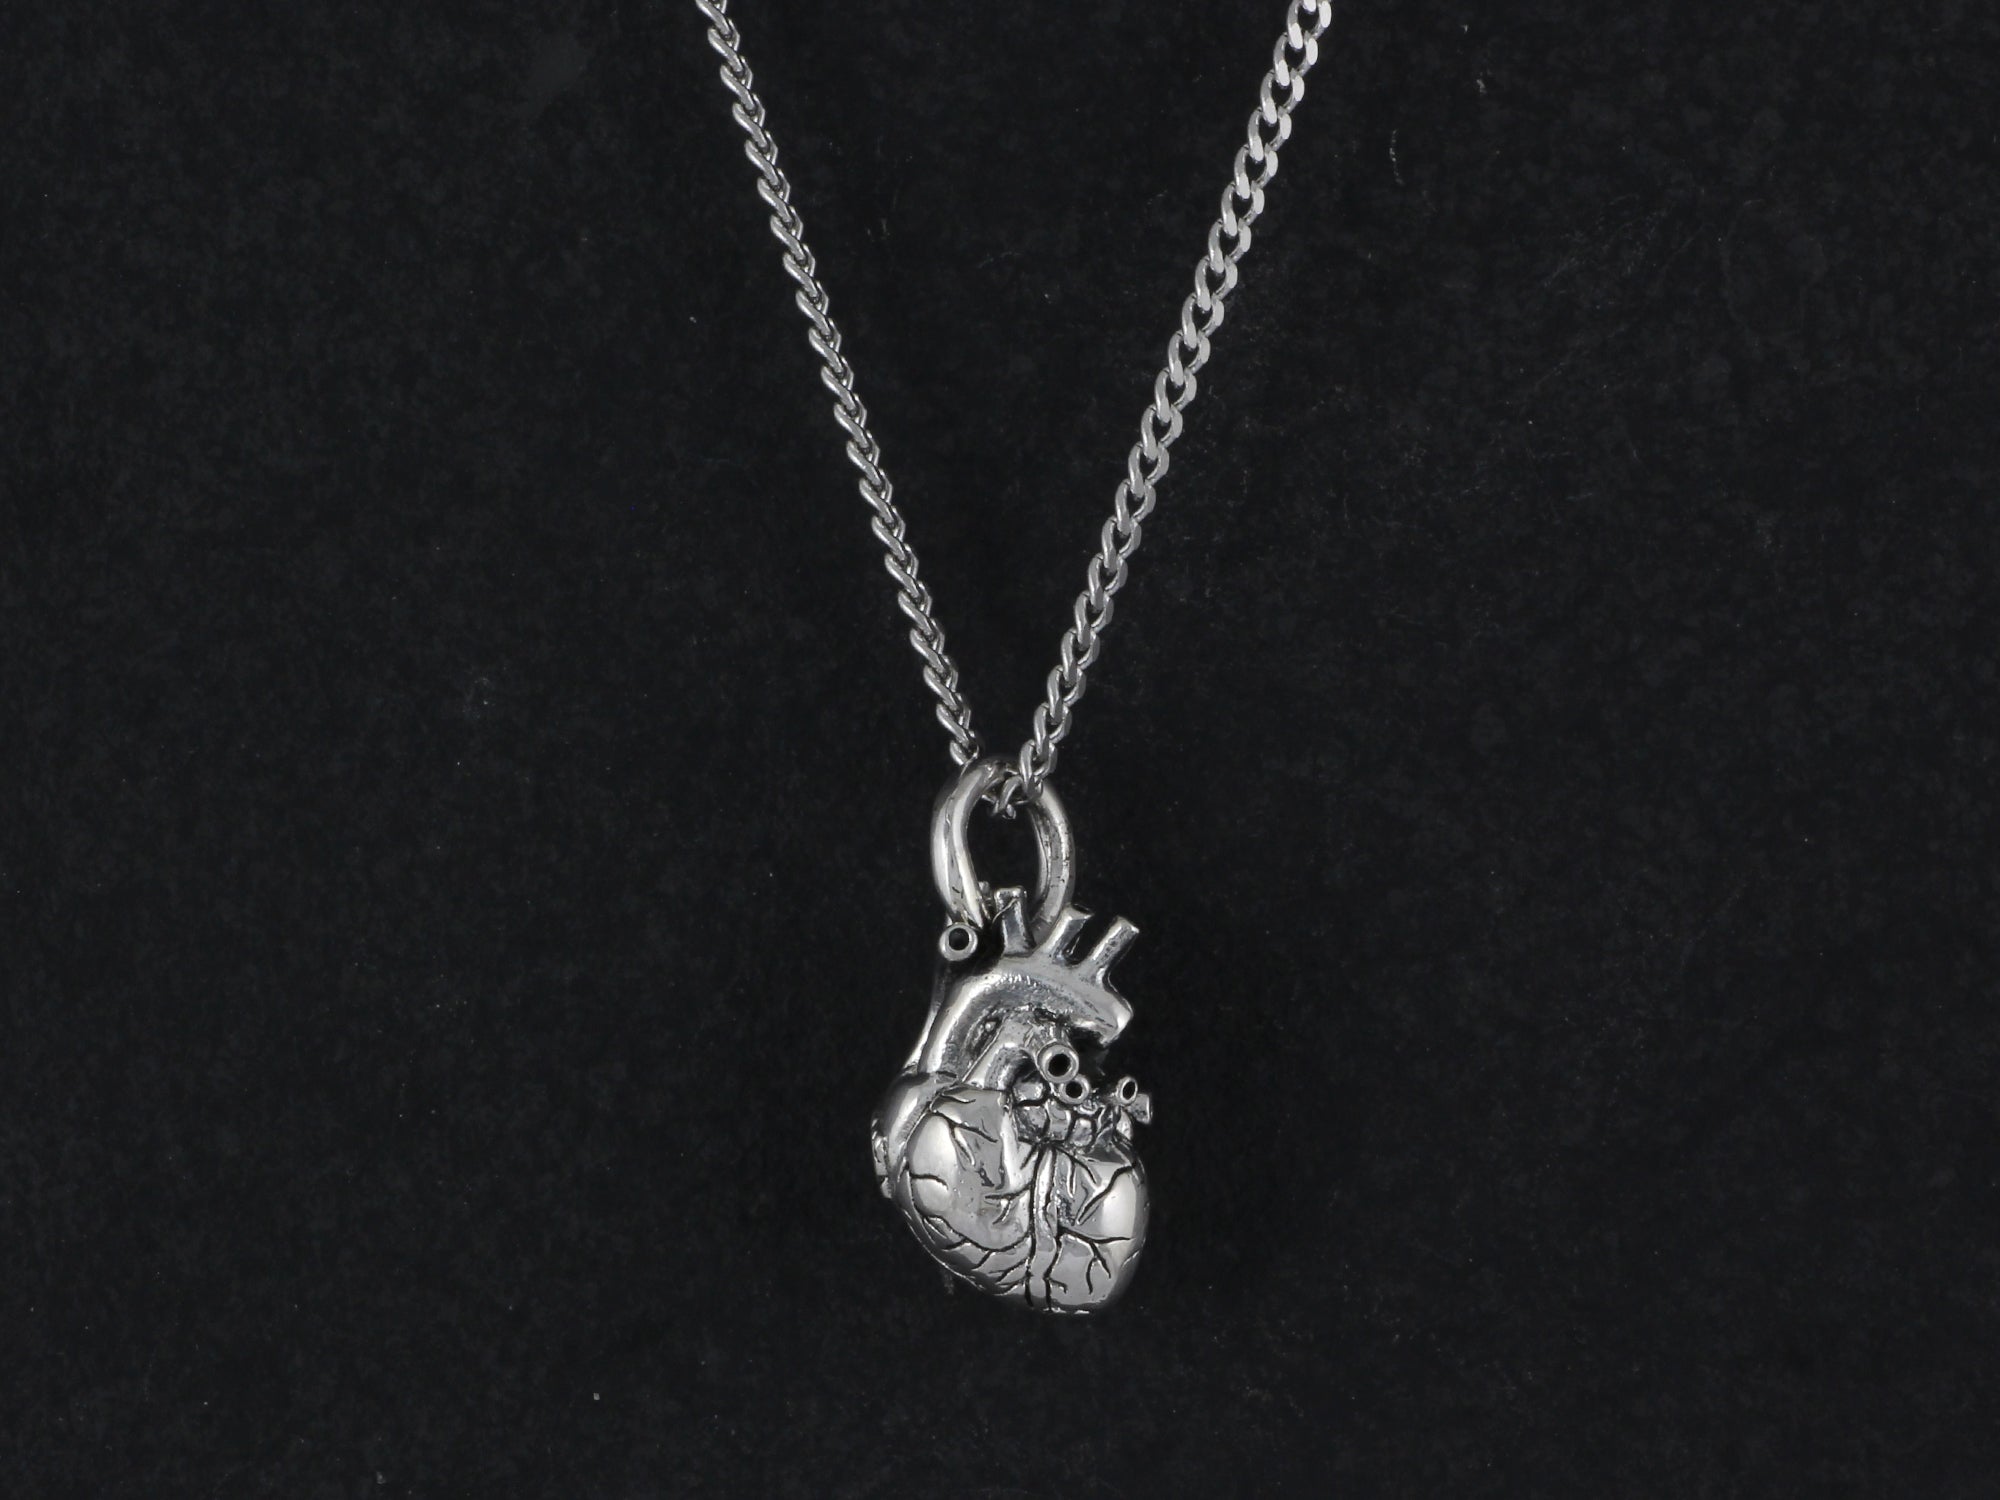 File:Heart Necklace in Chest.jpg - Wikipedia